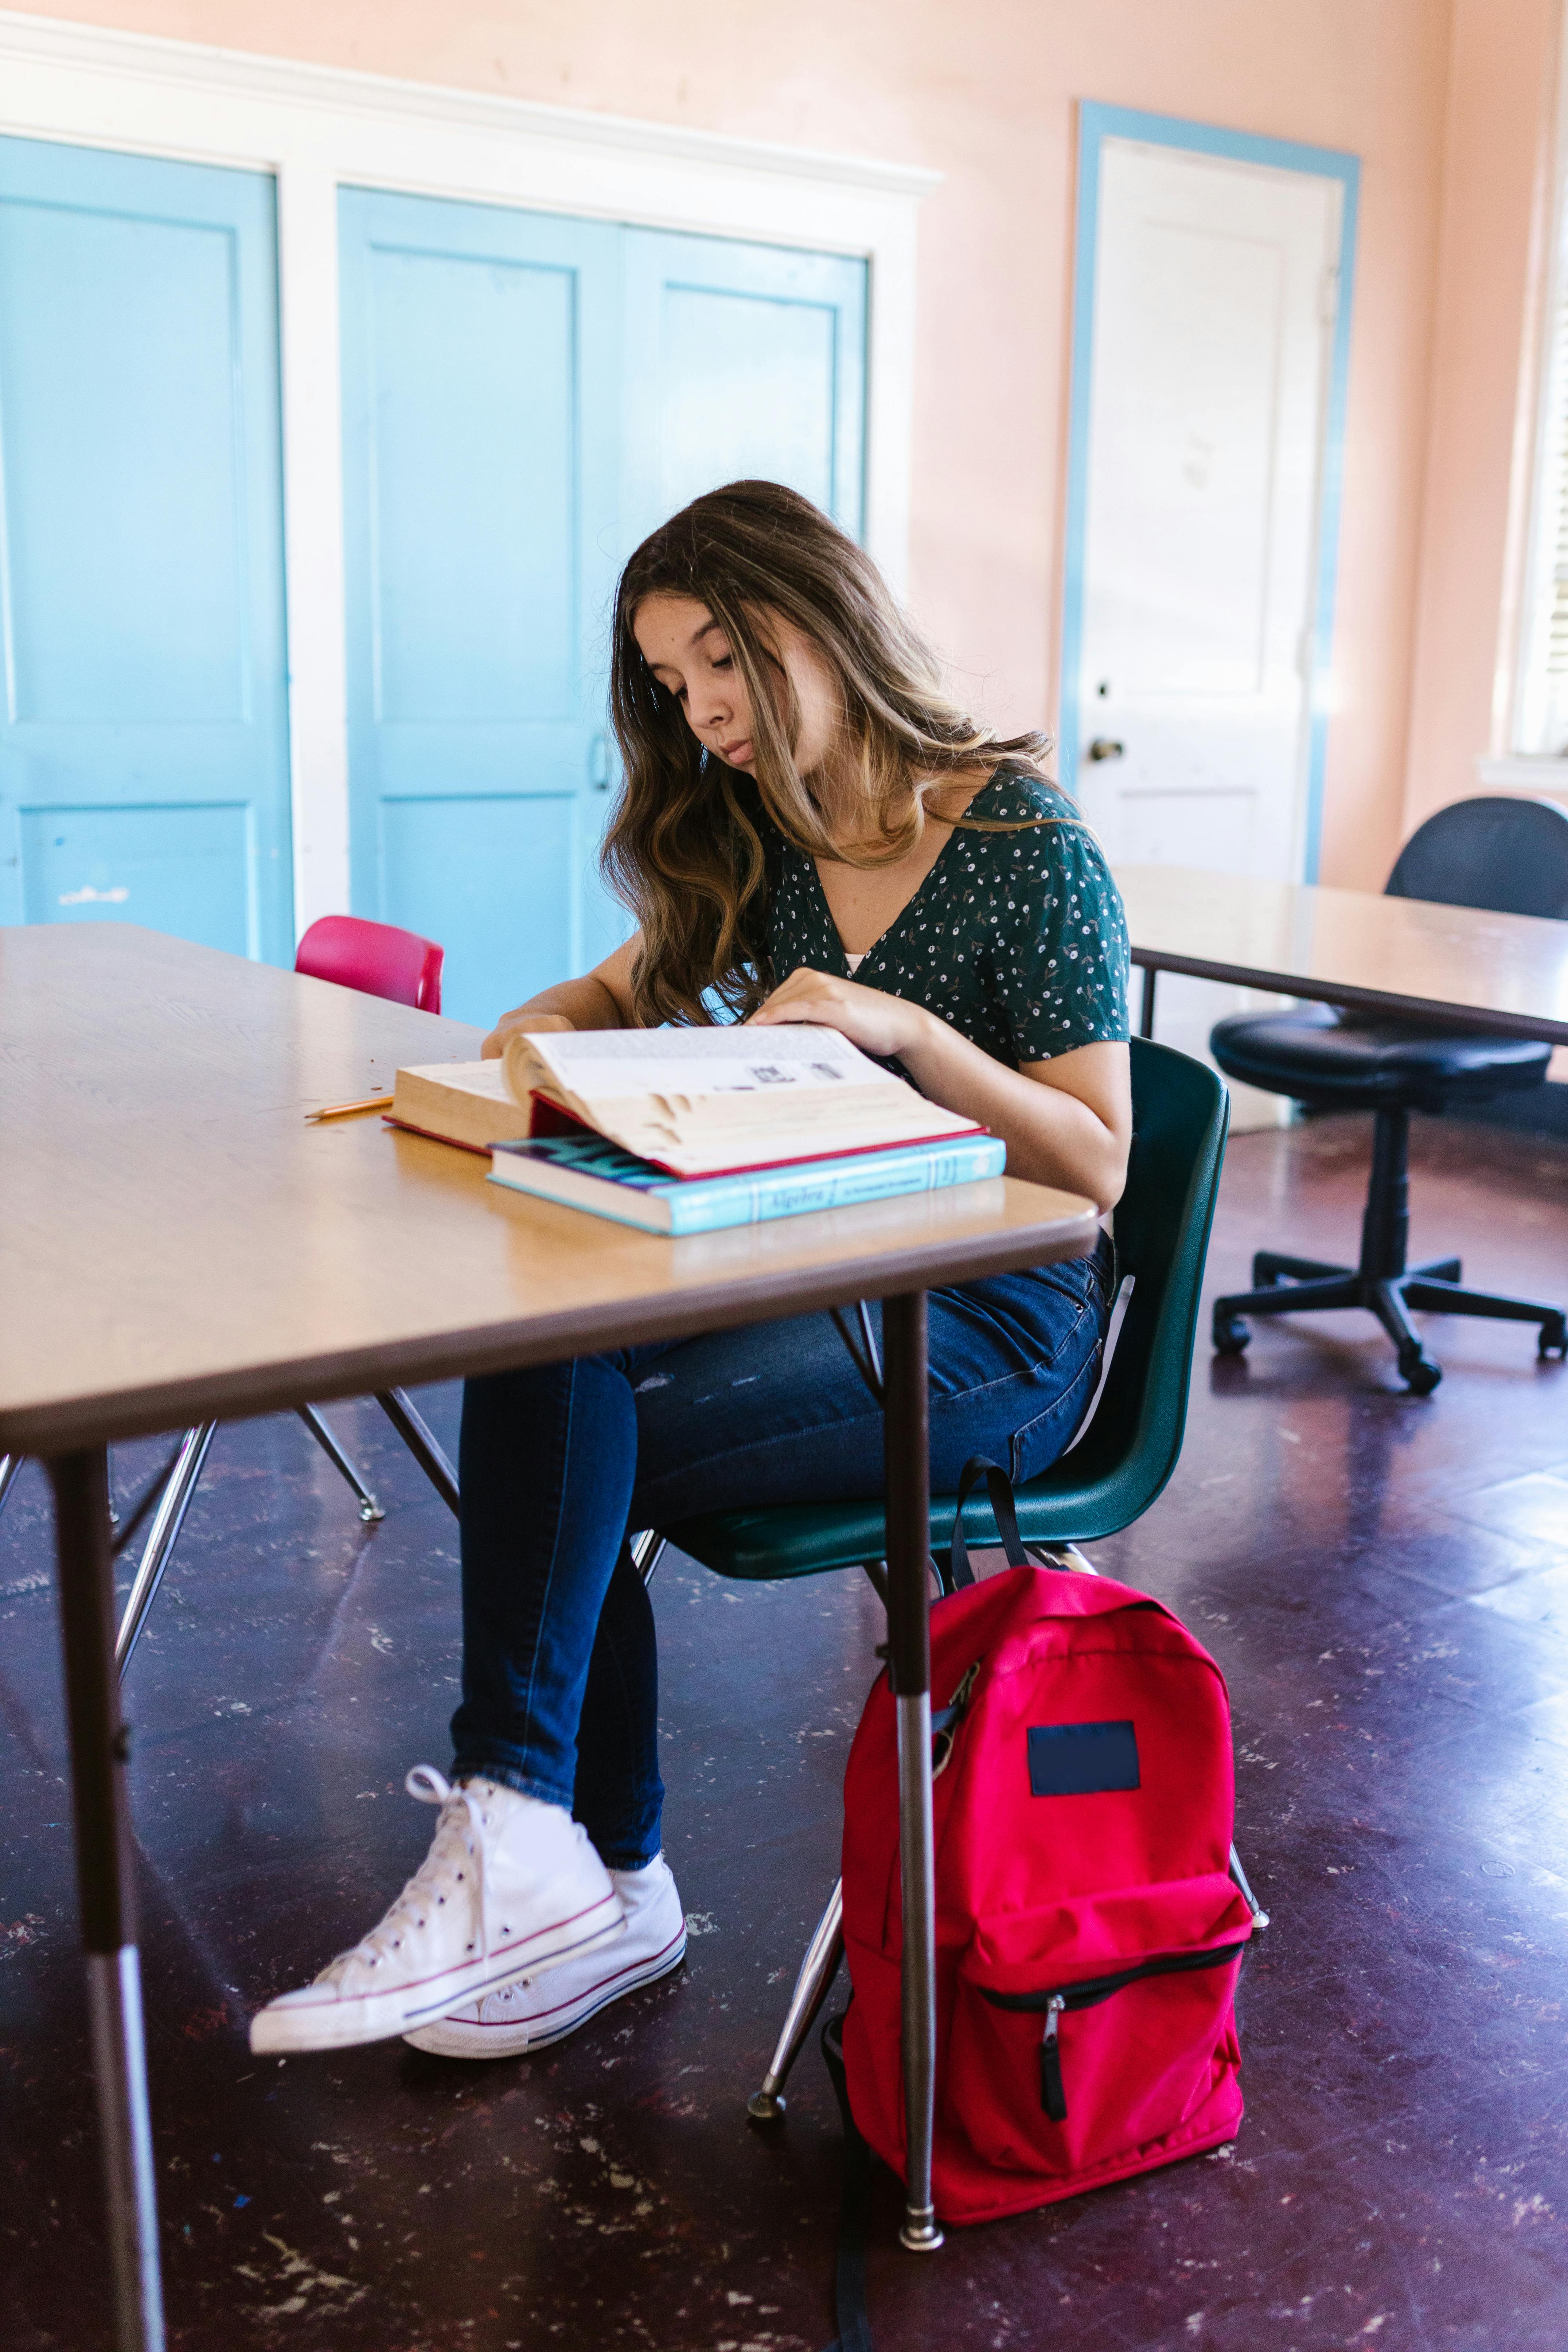 An unhappy girl sitting at a desk with a book in front of her at school | Source: Pexels